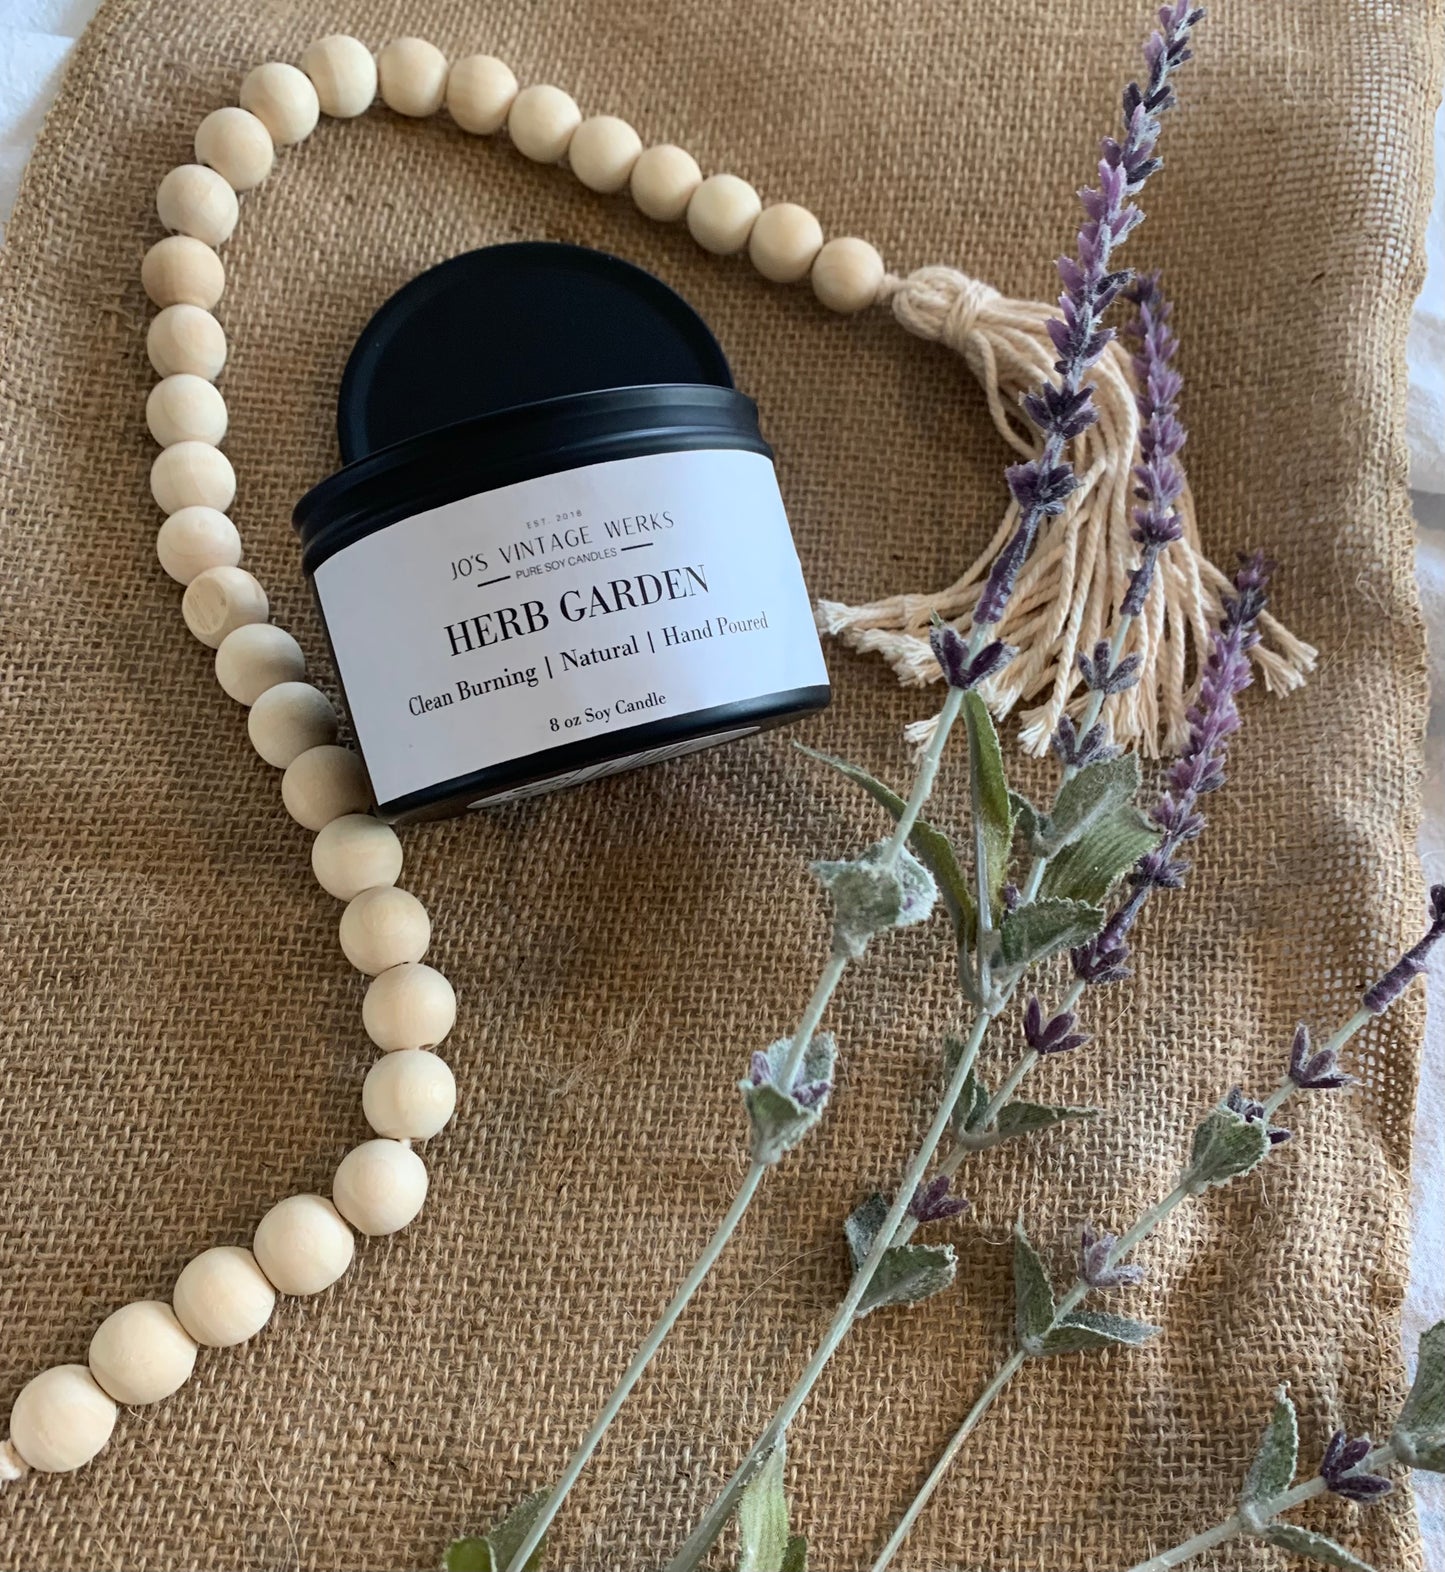 Herb Garden Soy Candle - Jo’s Vintage Werks